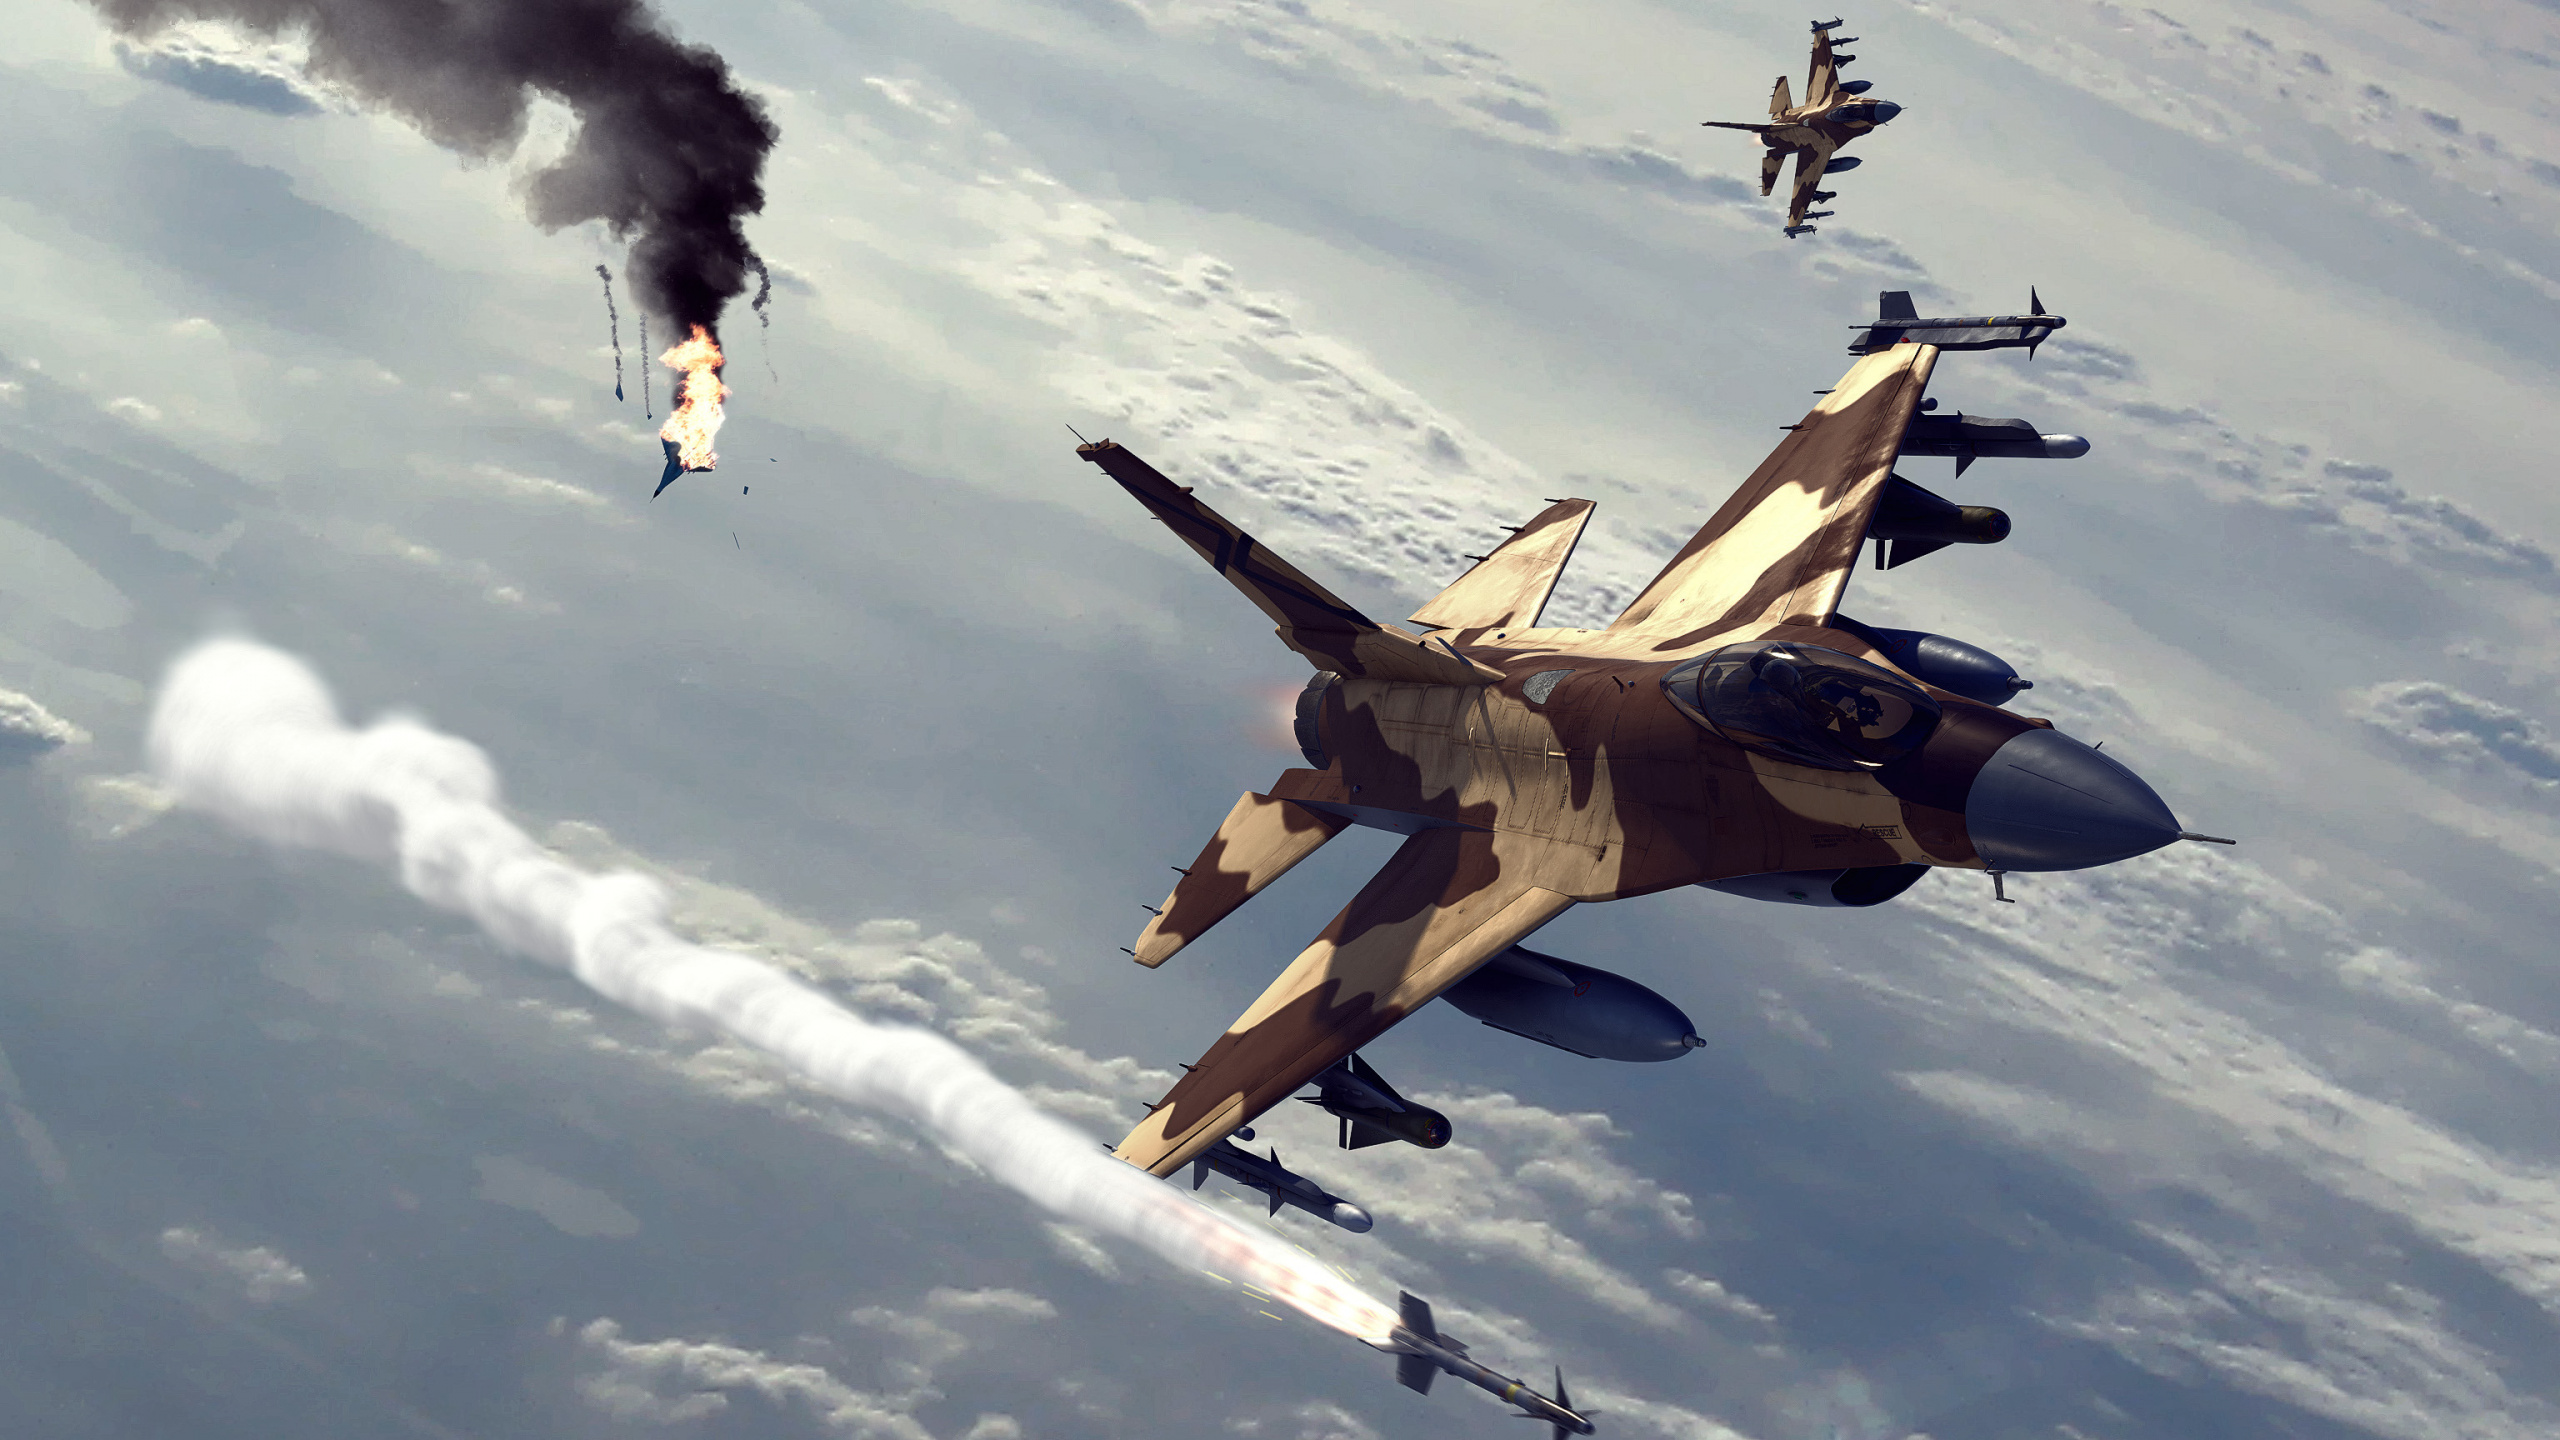 Brown Fighter Plane in The Sky. Wallpaper in 2560x1440 Resolution